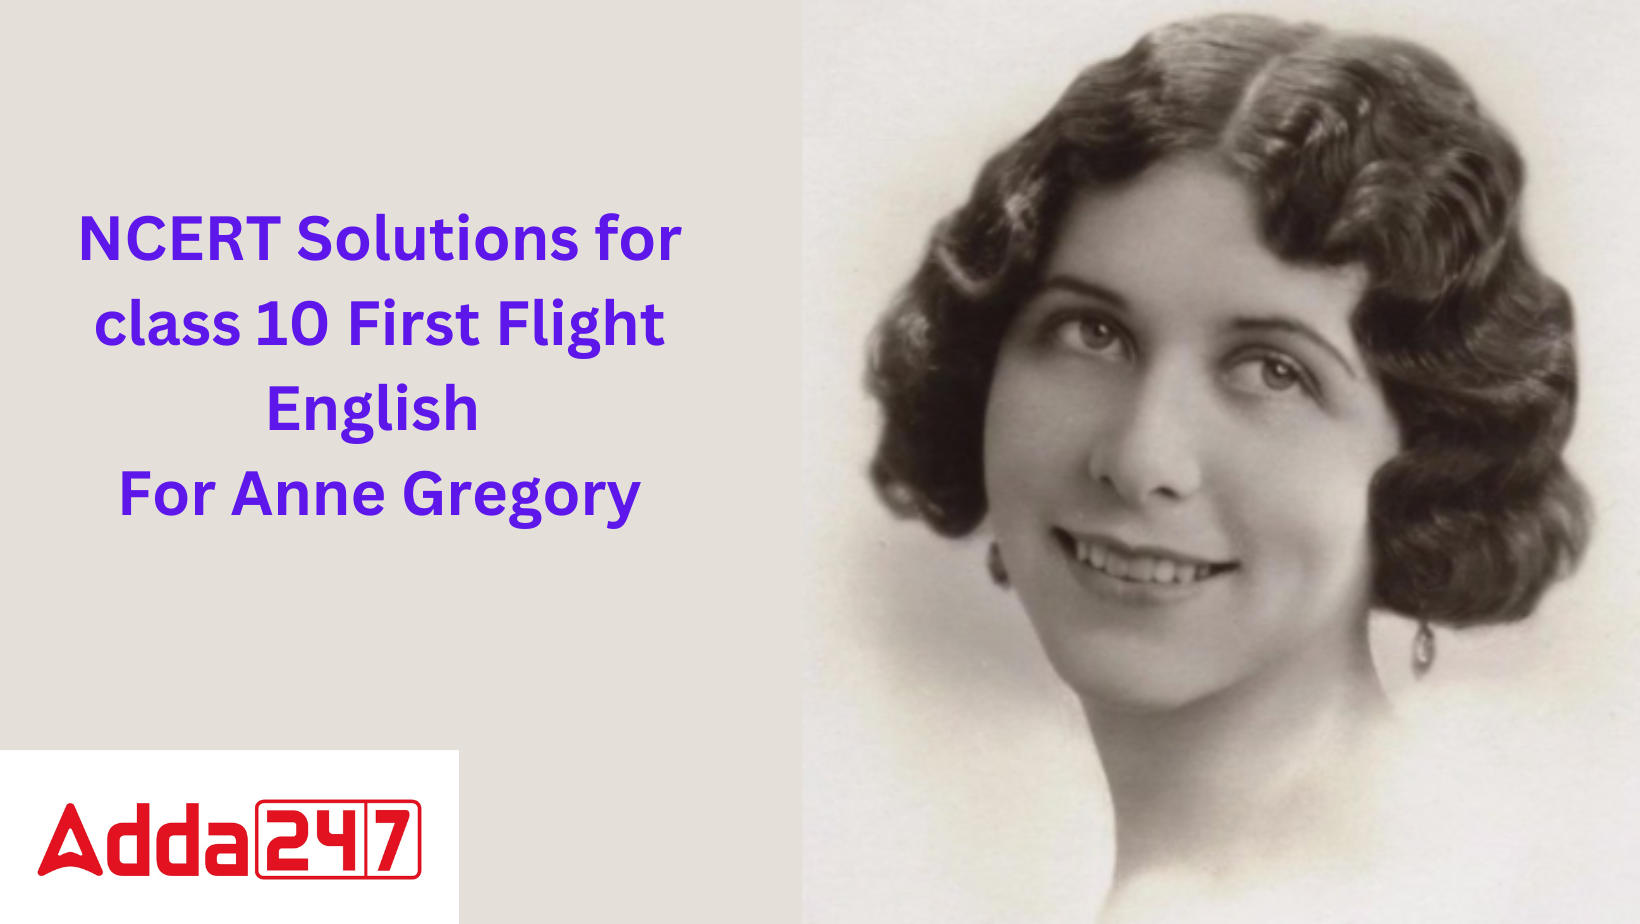 NCERT Solutions for class 10 First Flight English For Anne Gregory